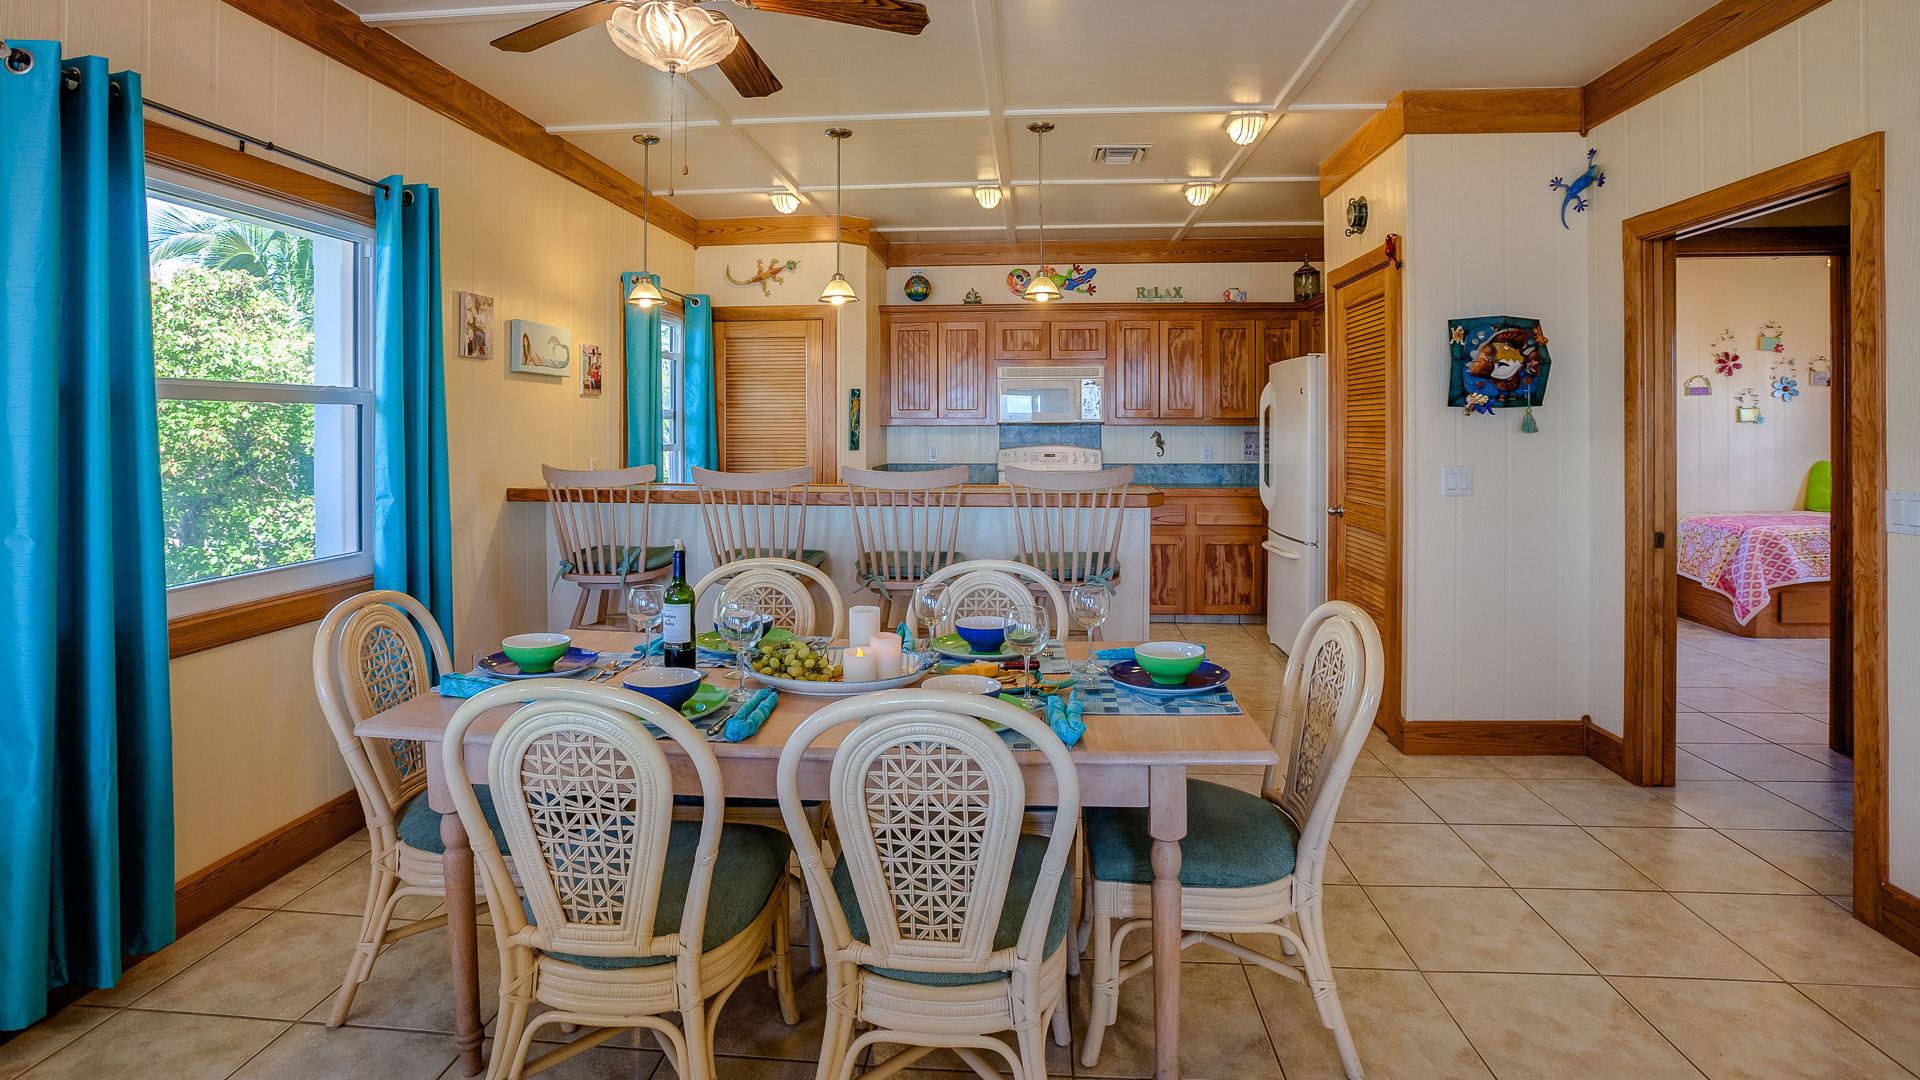 Done Reach Vacation Rental on Great Guana Cay